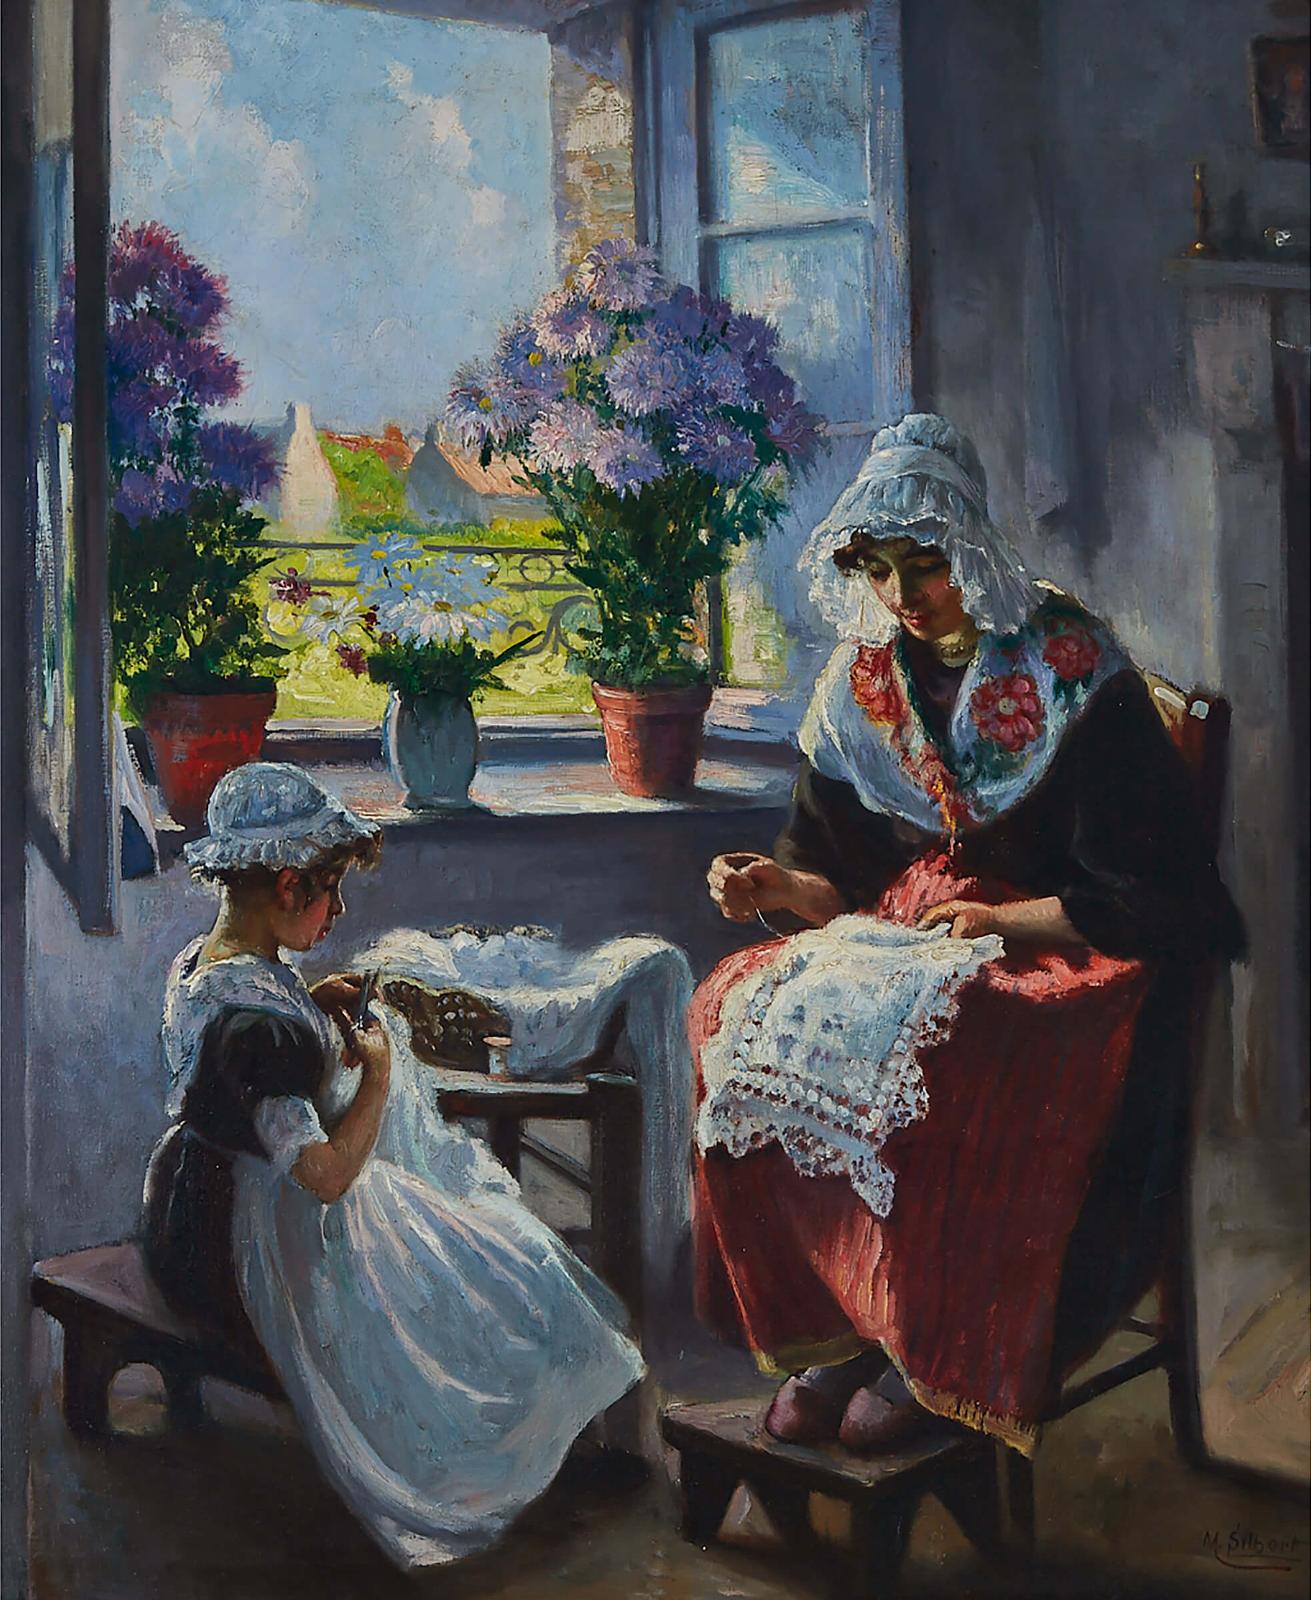 Max Silbert (1871-1930) - Sewing Lesson In A Sunlit Interior